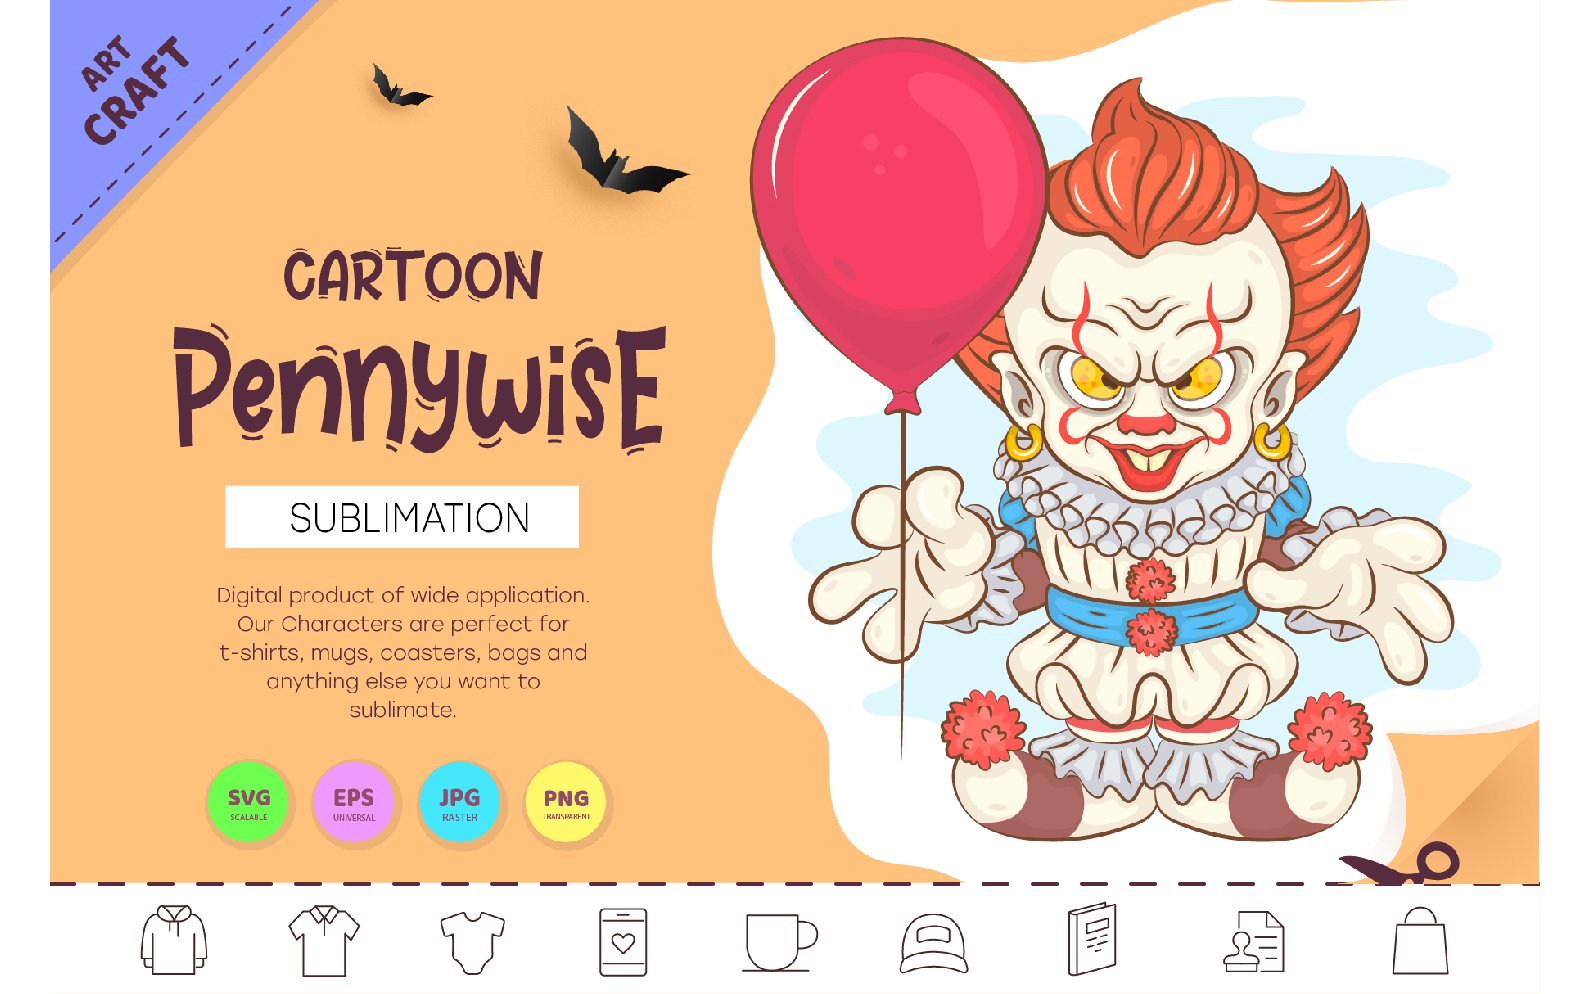 Template #278882 Pennywise Sublimation Webdesign Template - Logo template Preview